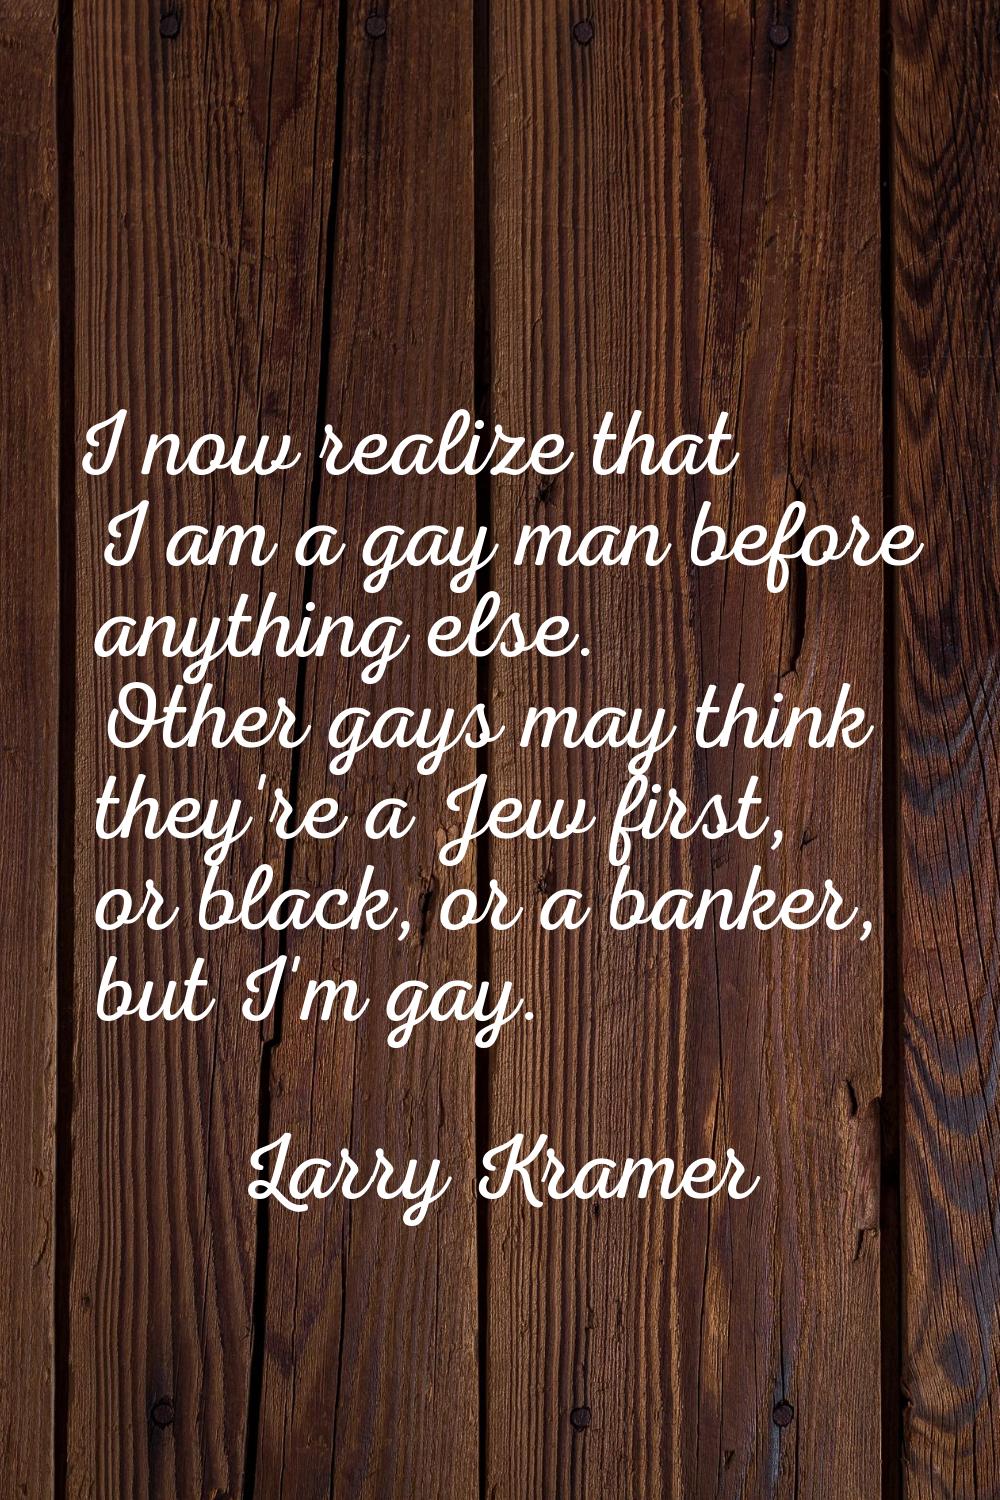 I now realize that I am a gay man before anything else. Other gays may think they're a Jew first, o